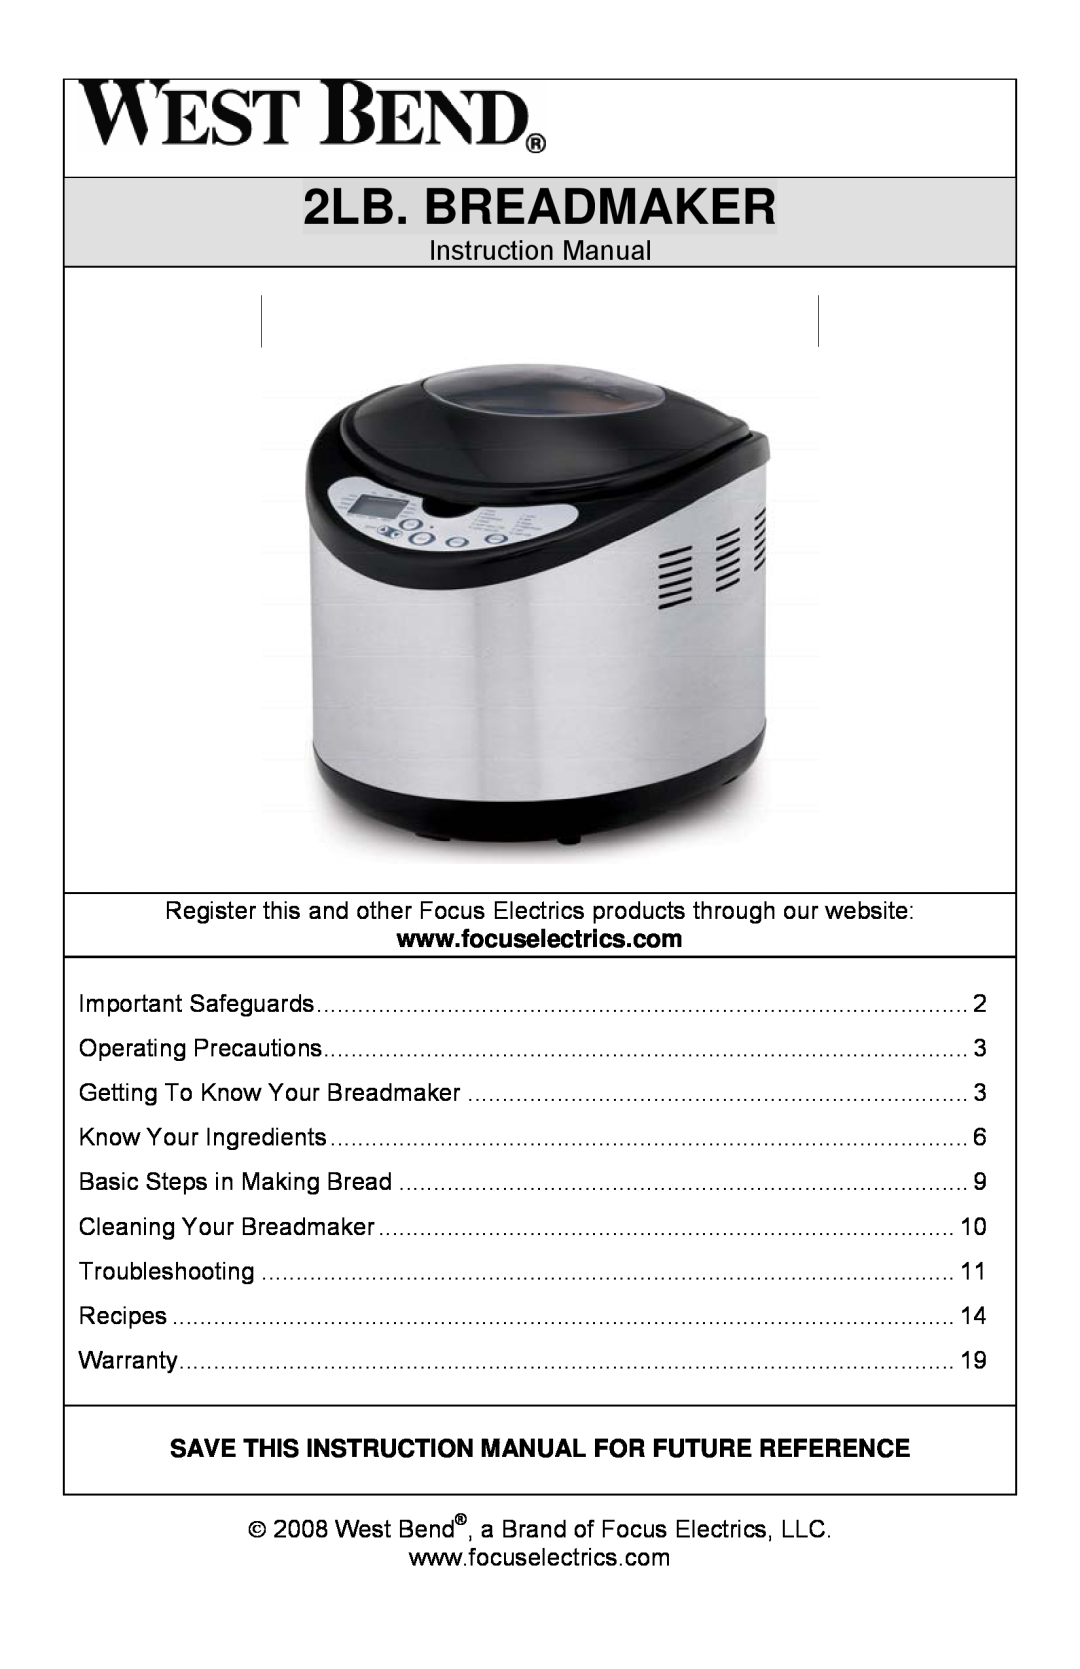 West Bend L5689A instruction manual 2LB. BREADMAKER, Save This Instruction Manual For Future Reference 